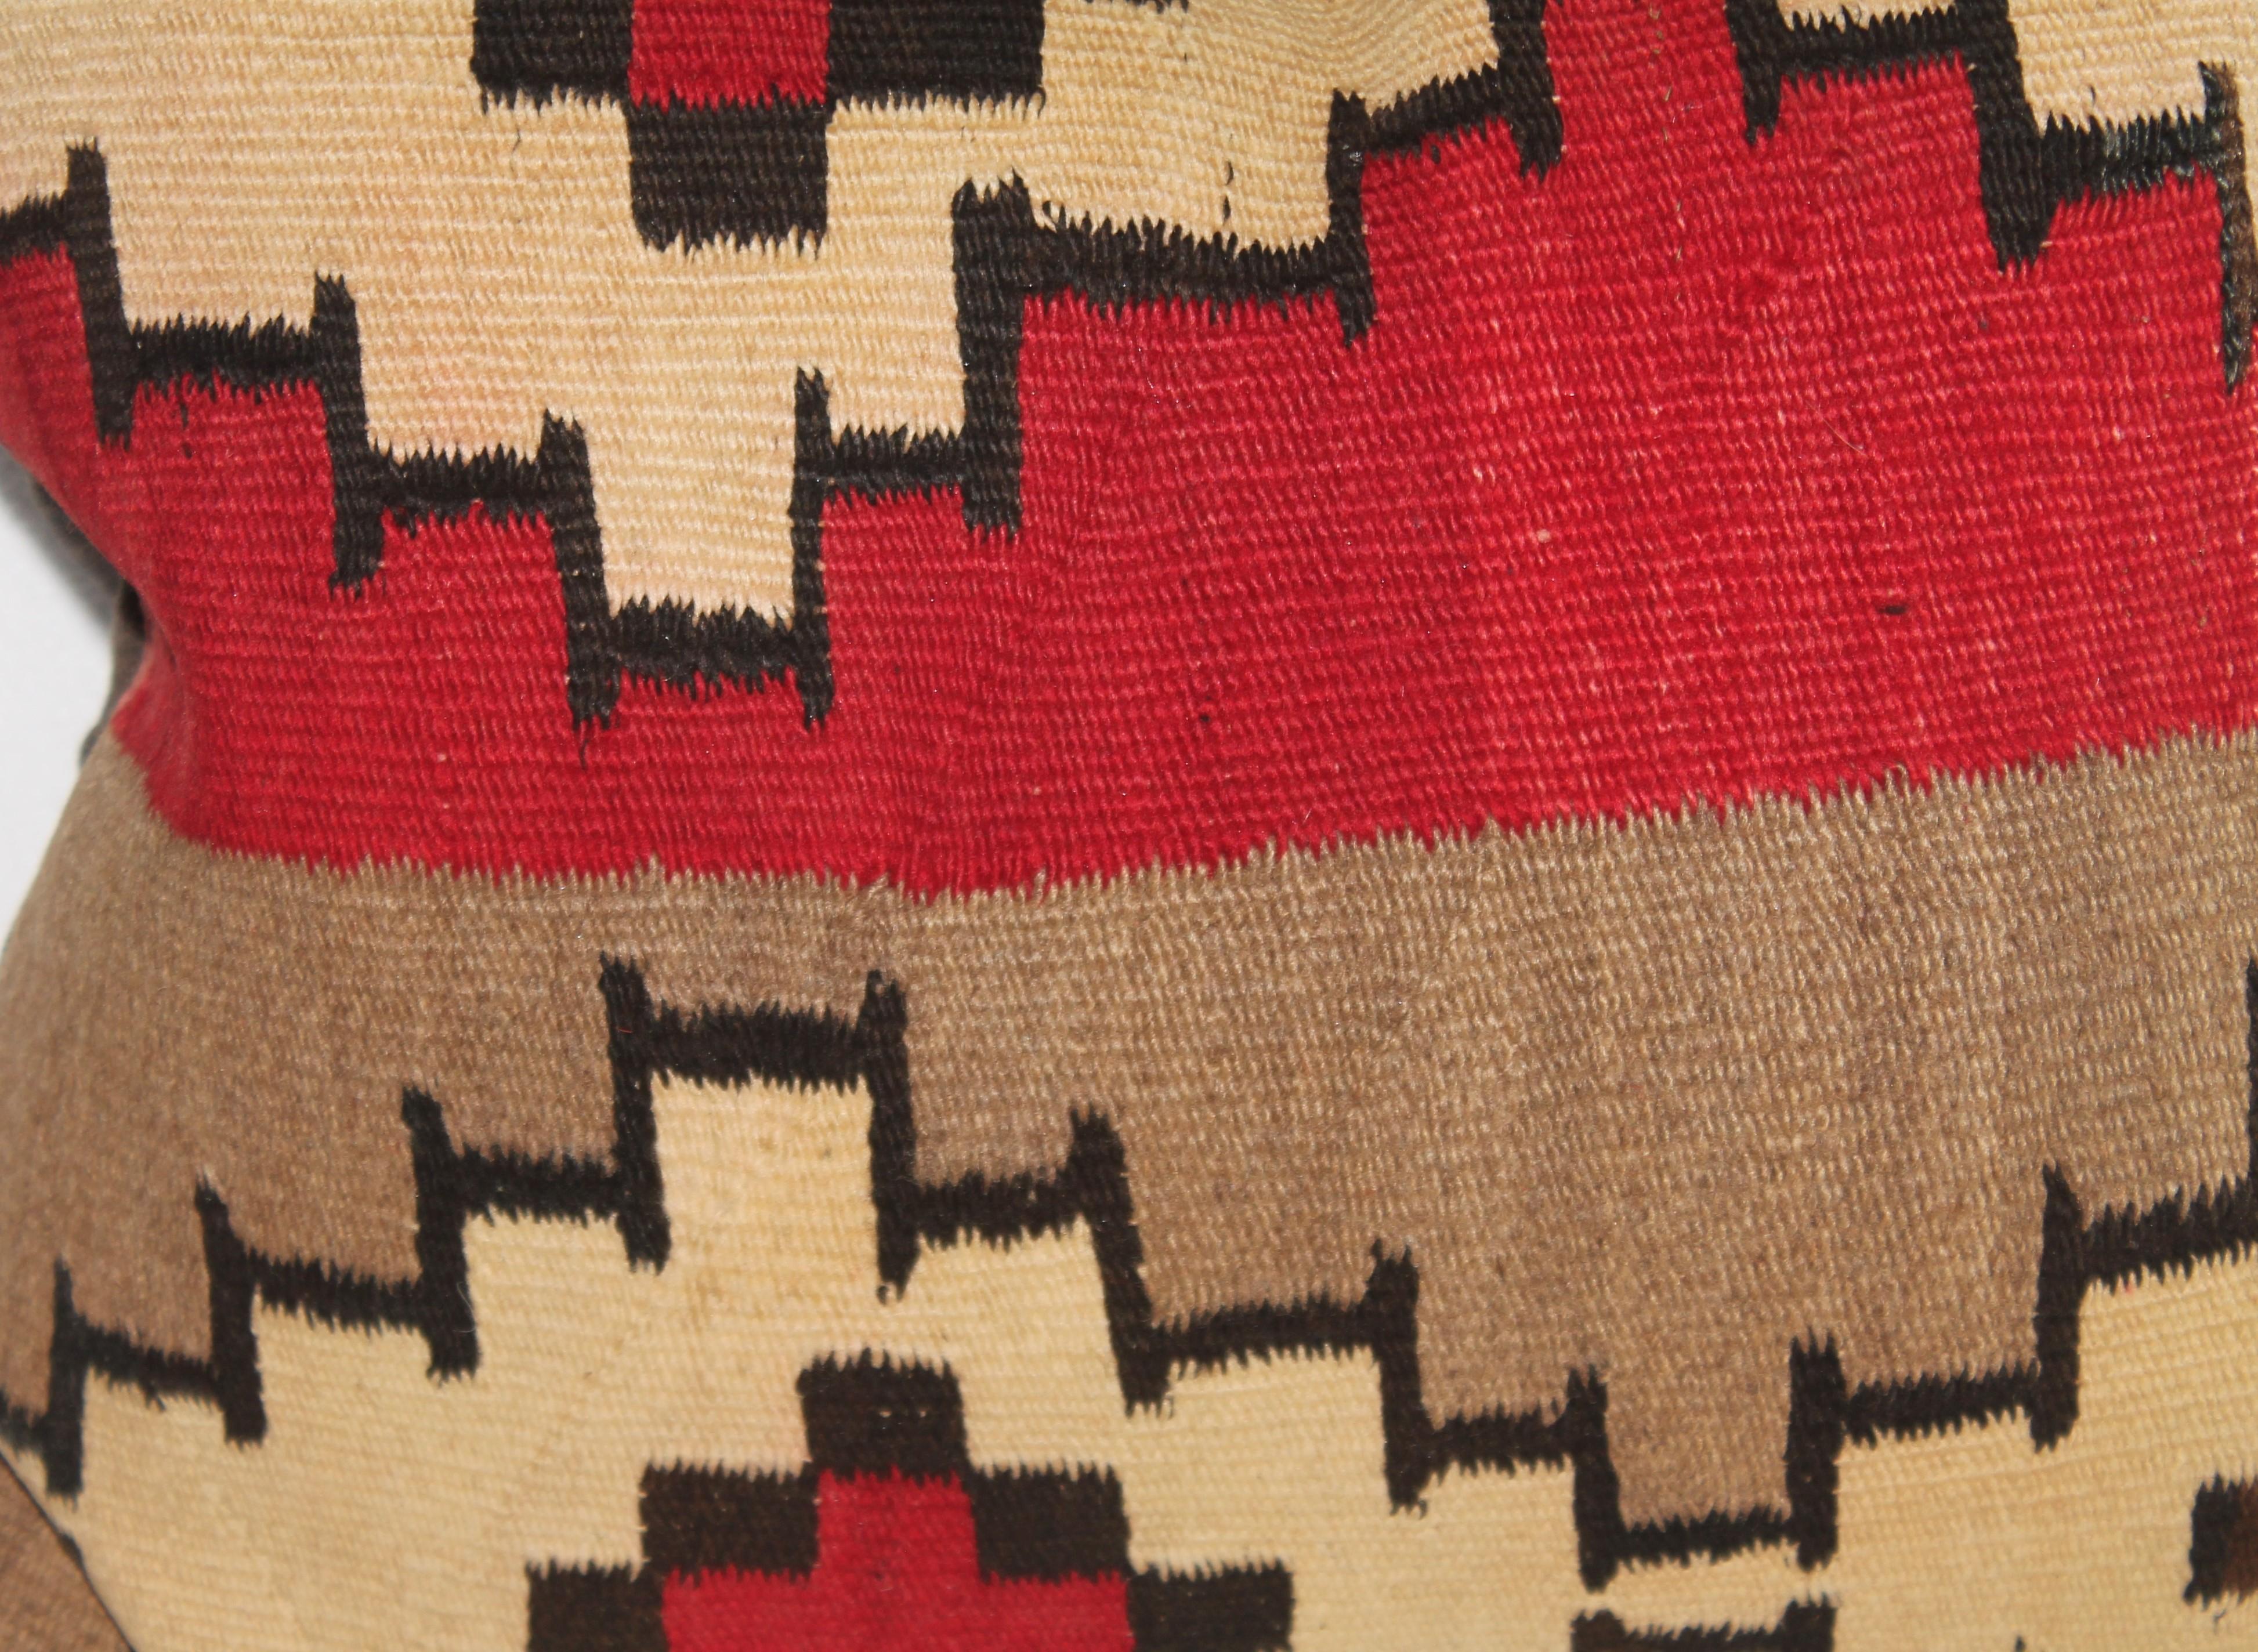 Hand-Woven Early Navajo Indian Weaving Pillows, Pair